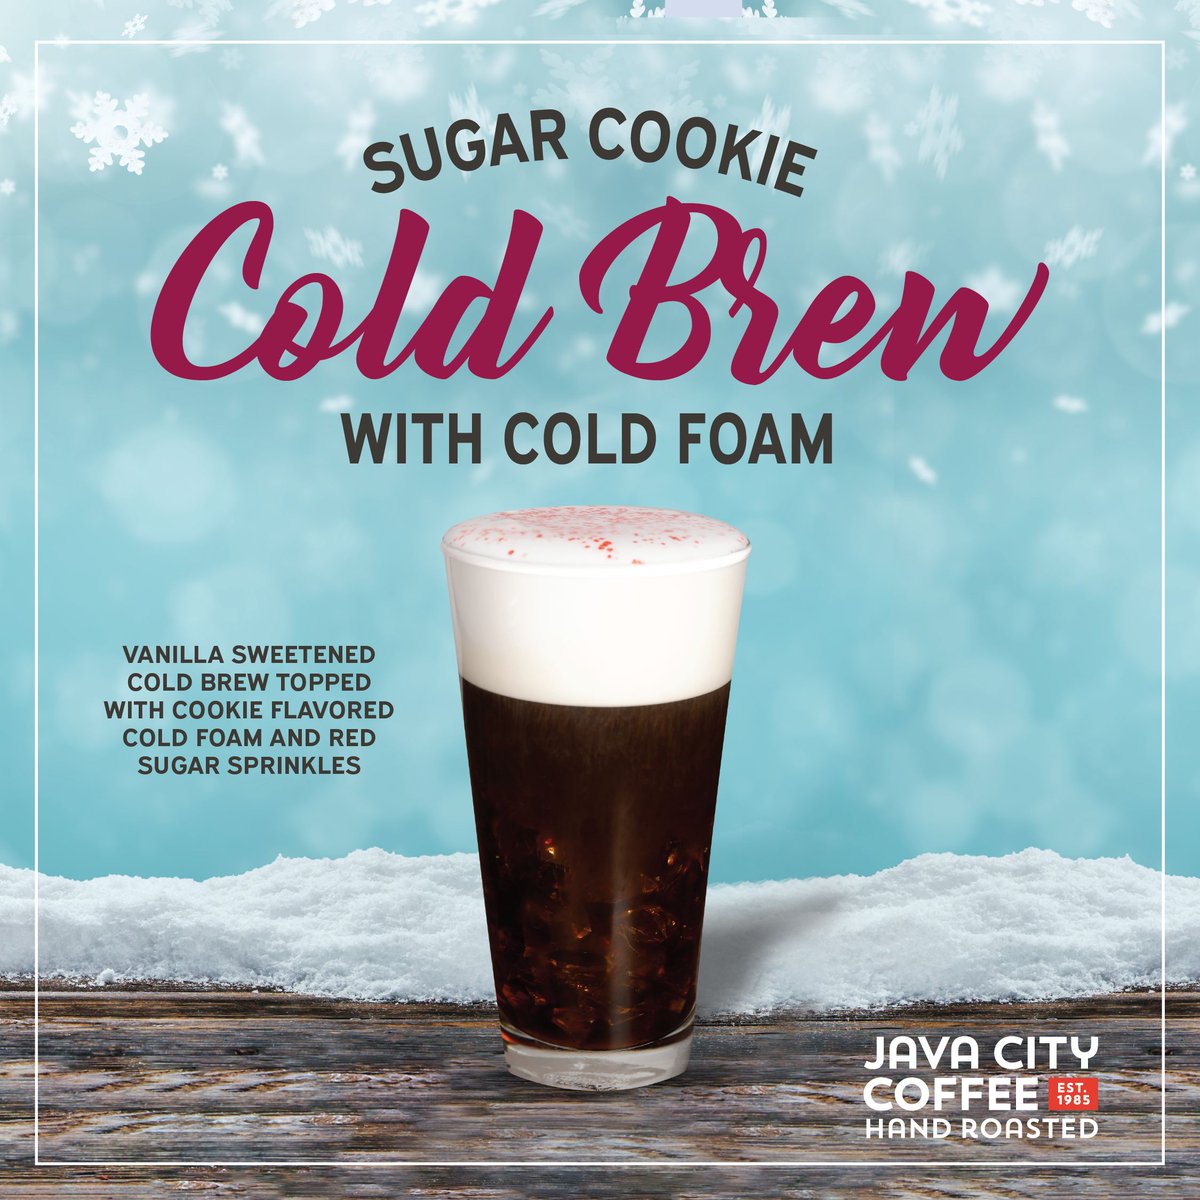 Need some energy to get through finals week? Don't forget about the seasonal drinks at Java City to give you that extra boost! #wku #wkurg #javacity